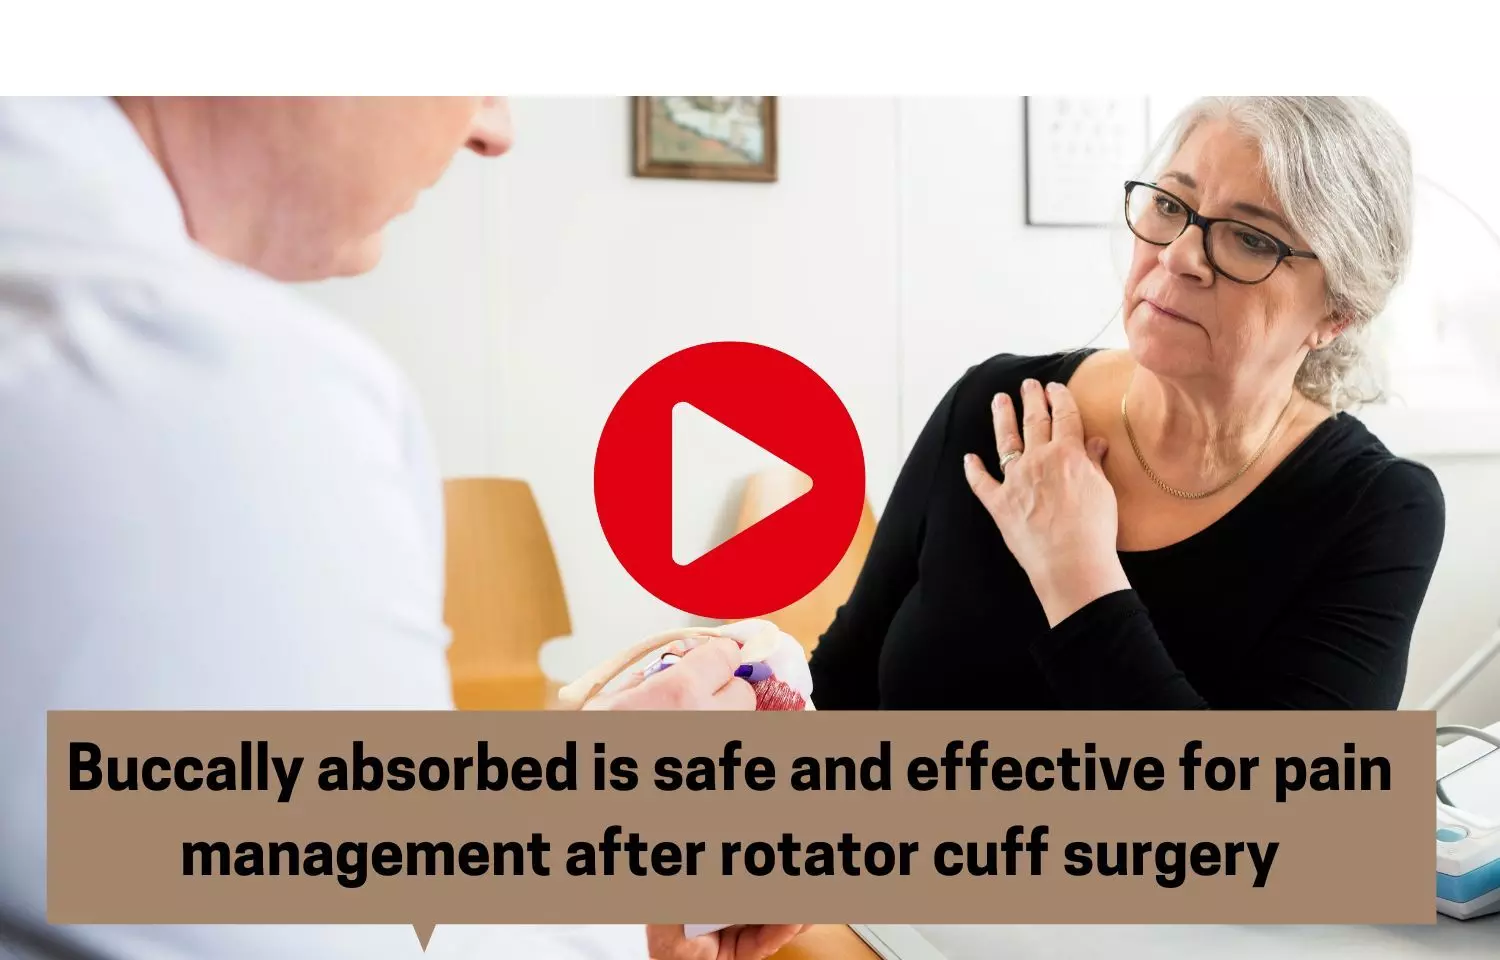 Buccally absorbed is safe and effective for pain management after rotator cuff surgery